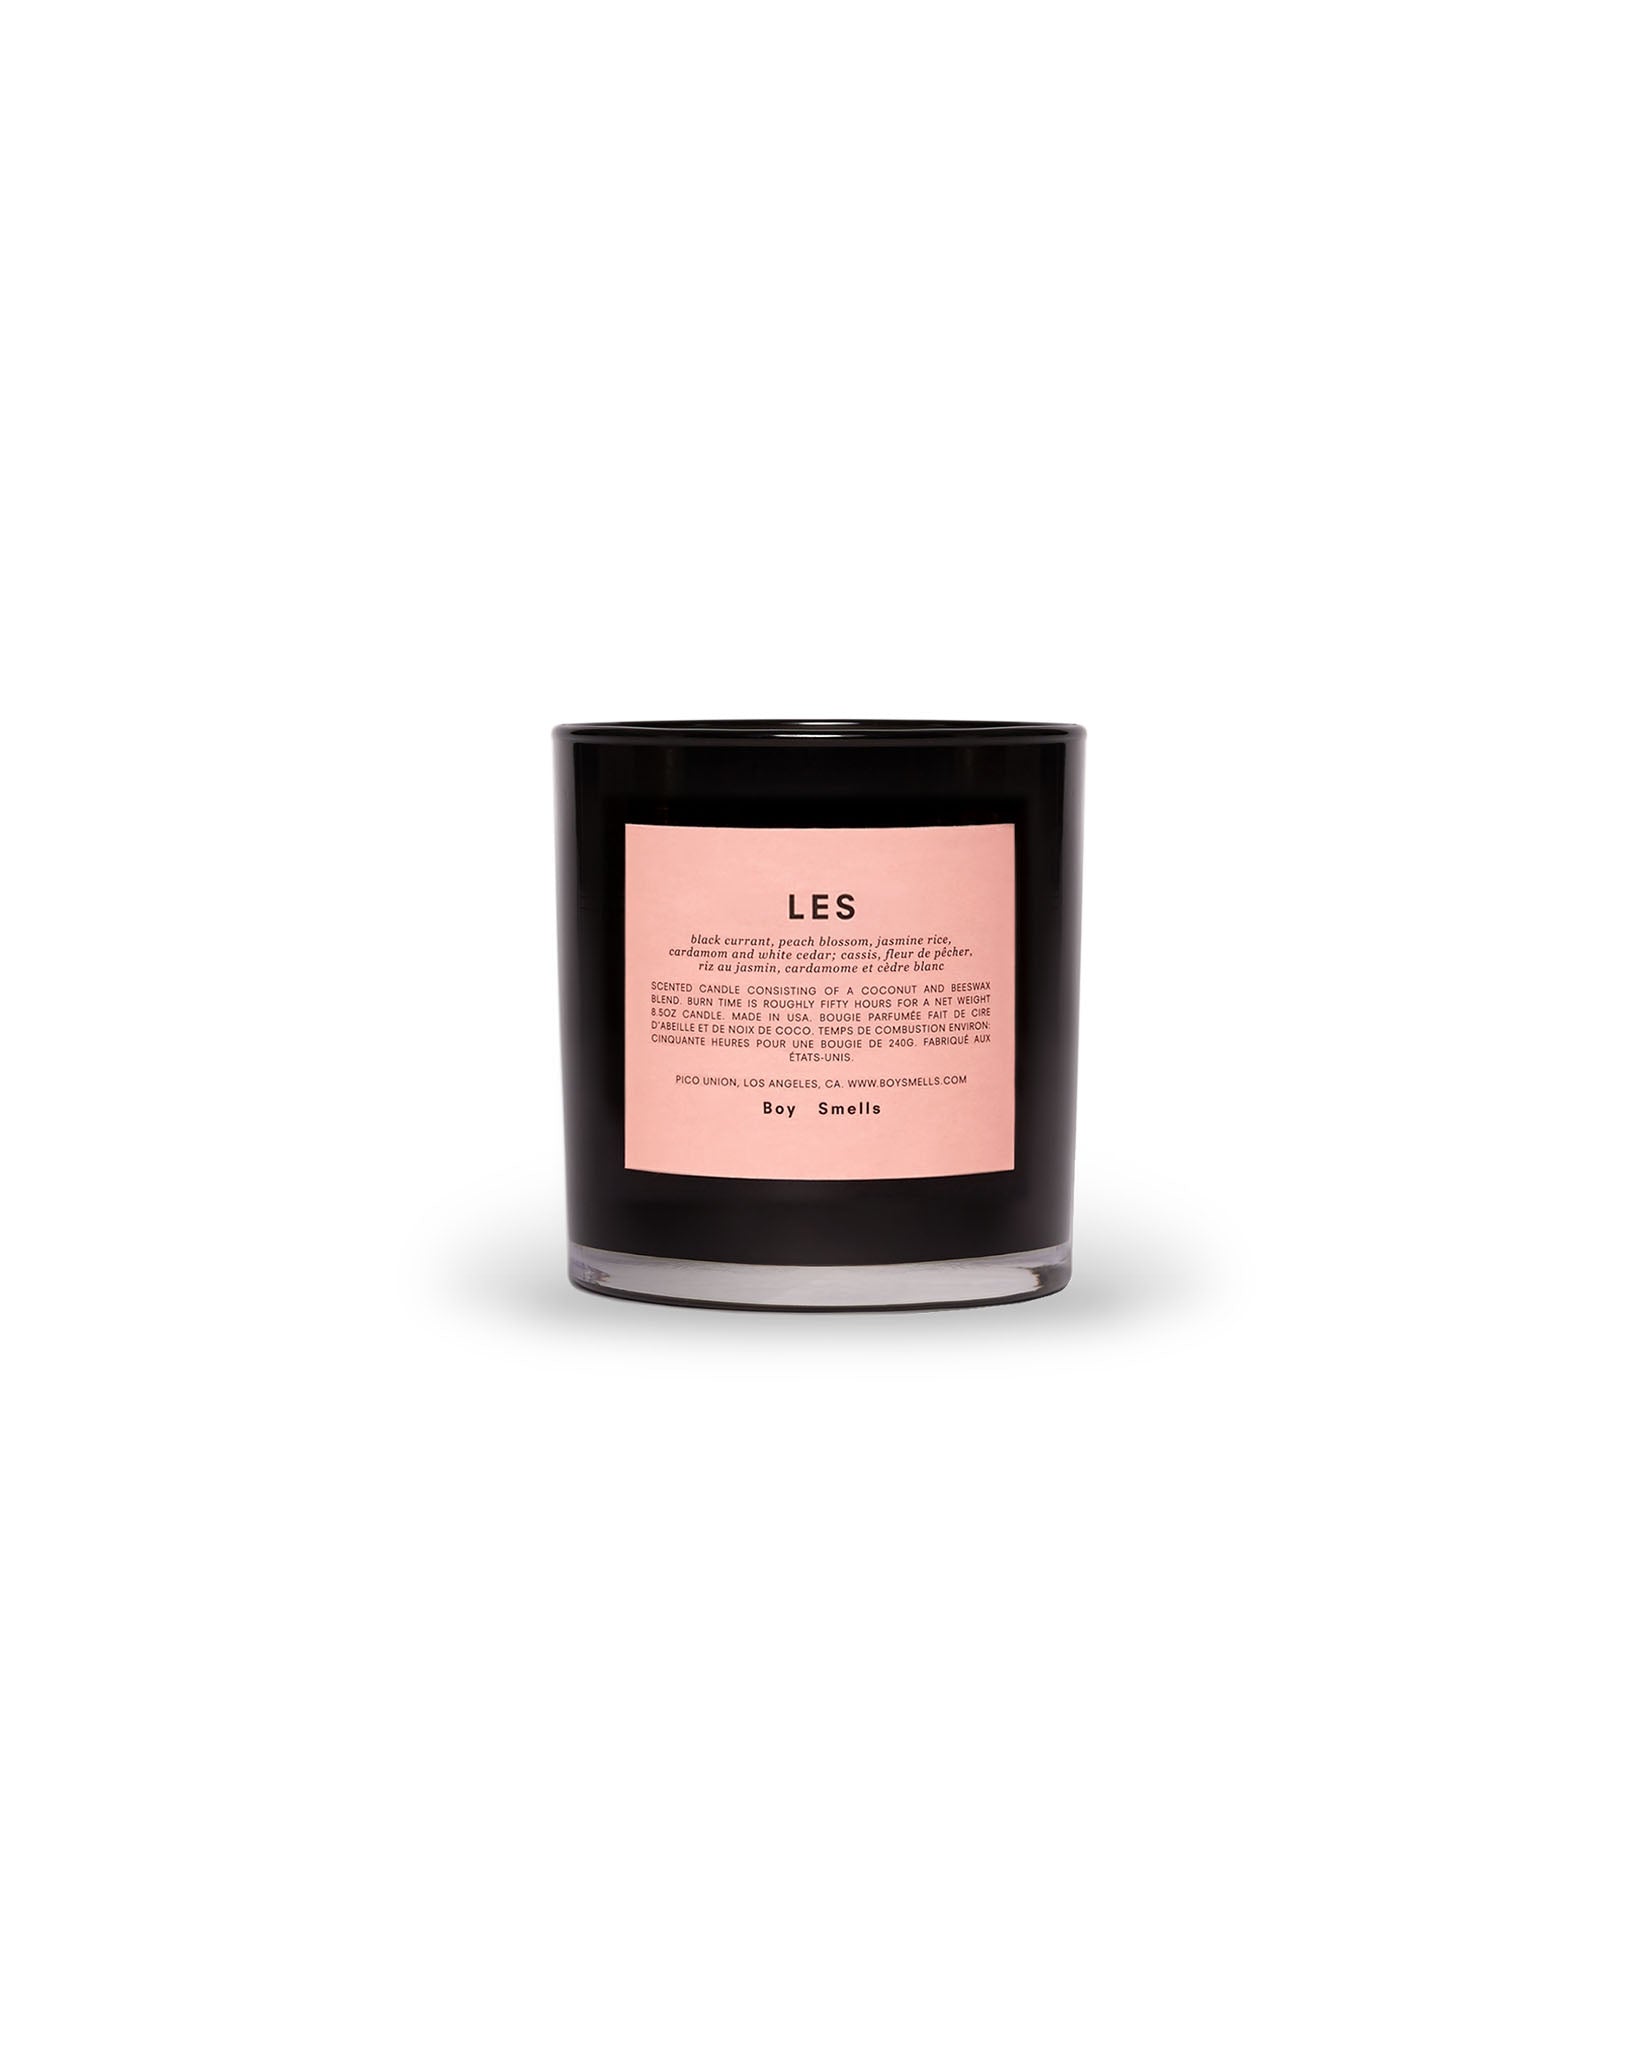 Les Scented Candle 240g